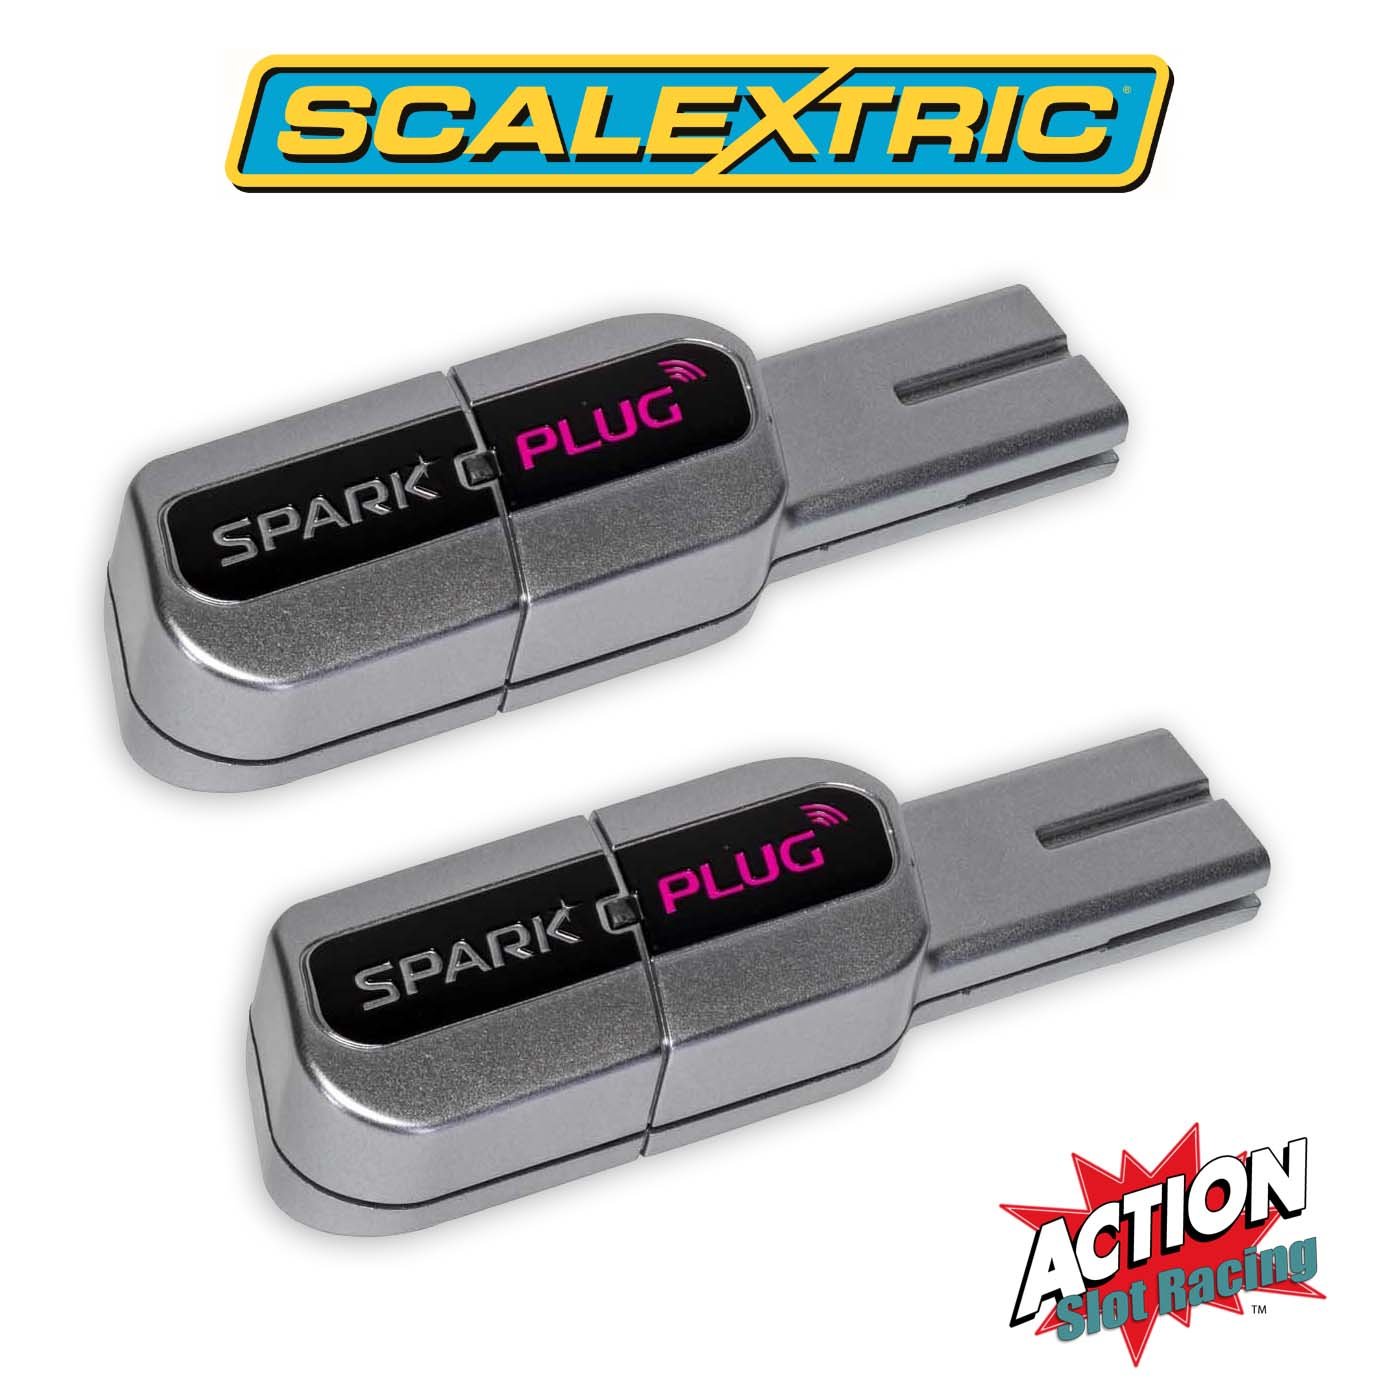 Scalextric C8333 - Wireless Dongle Pair Of Spark Plugs With Power & Base